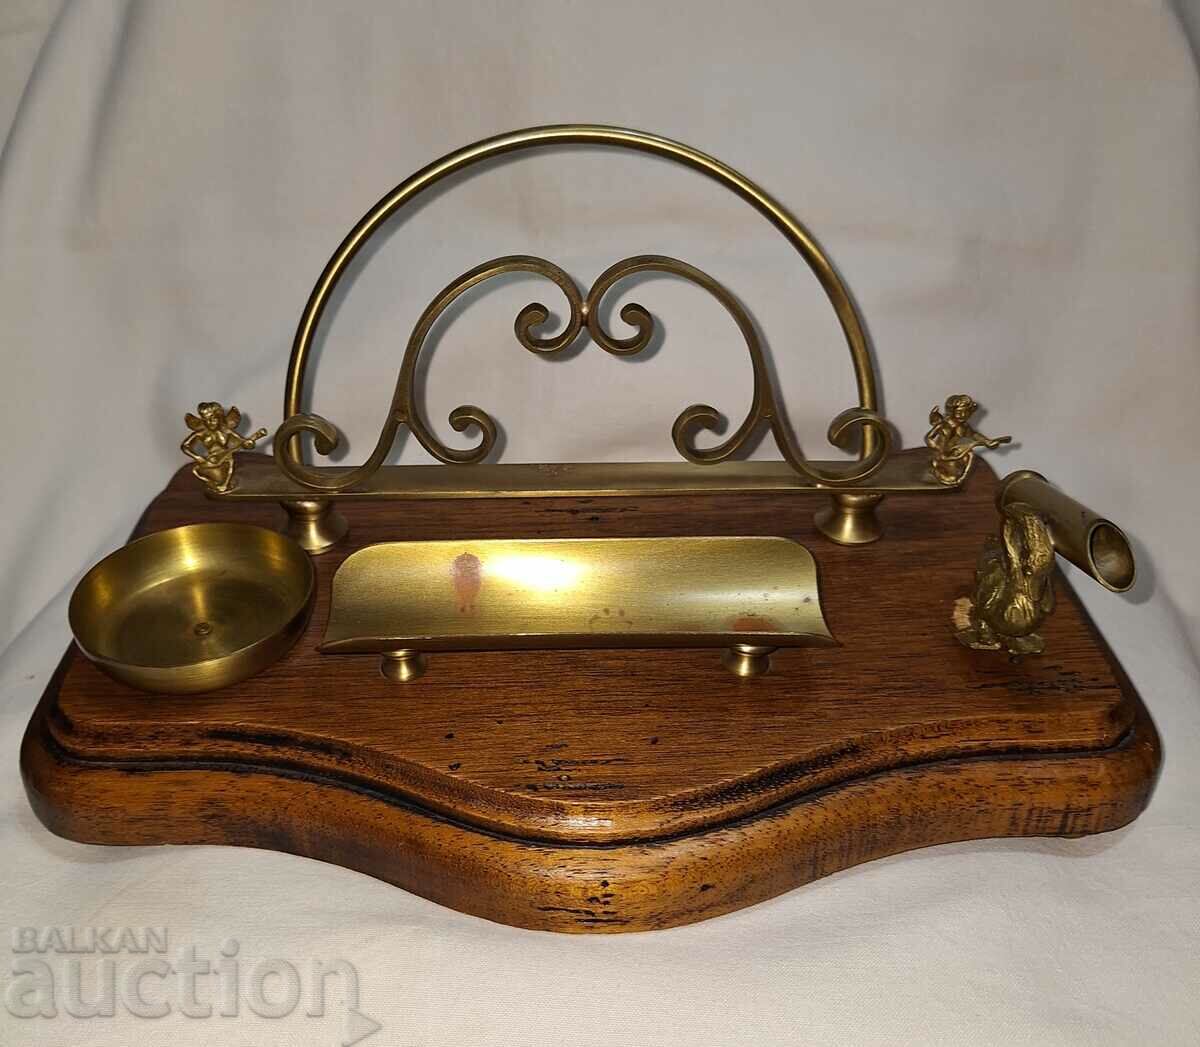 Vintage inkwell with bronze fittings